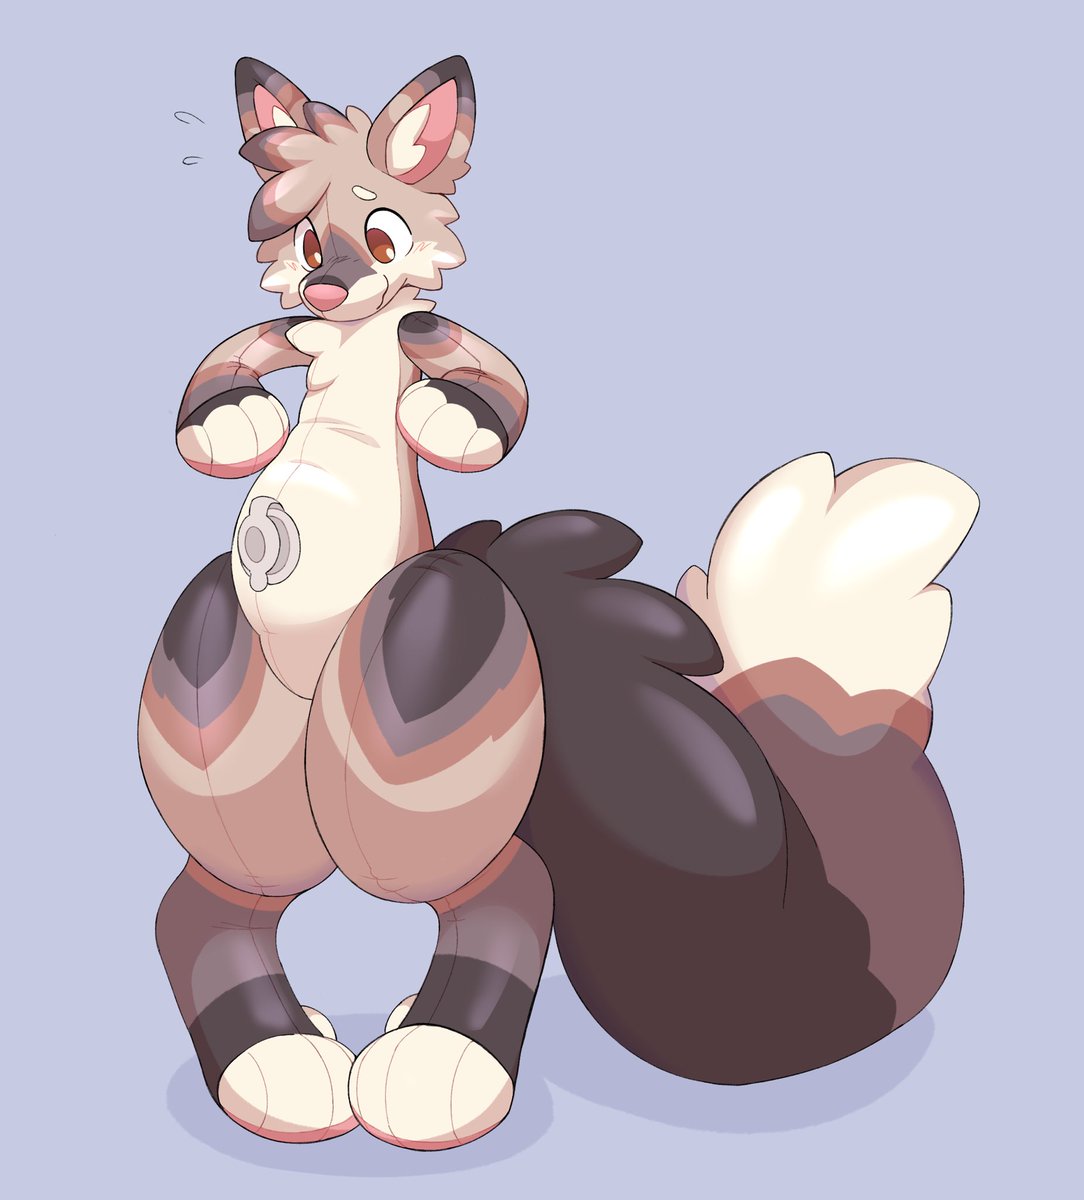 finished ych!! a squeaky @FoxFernEden !